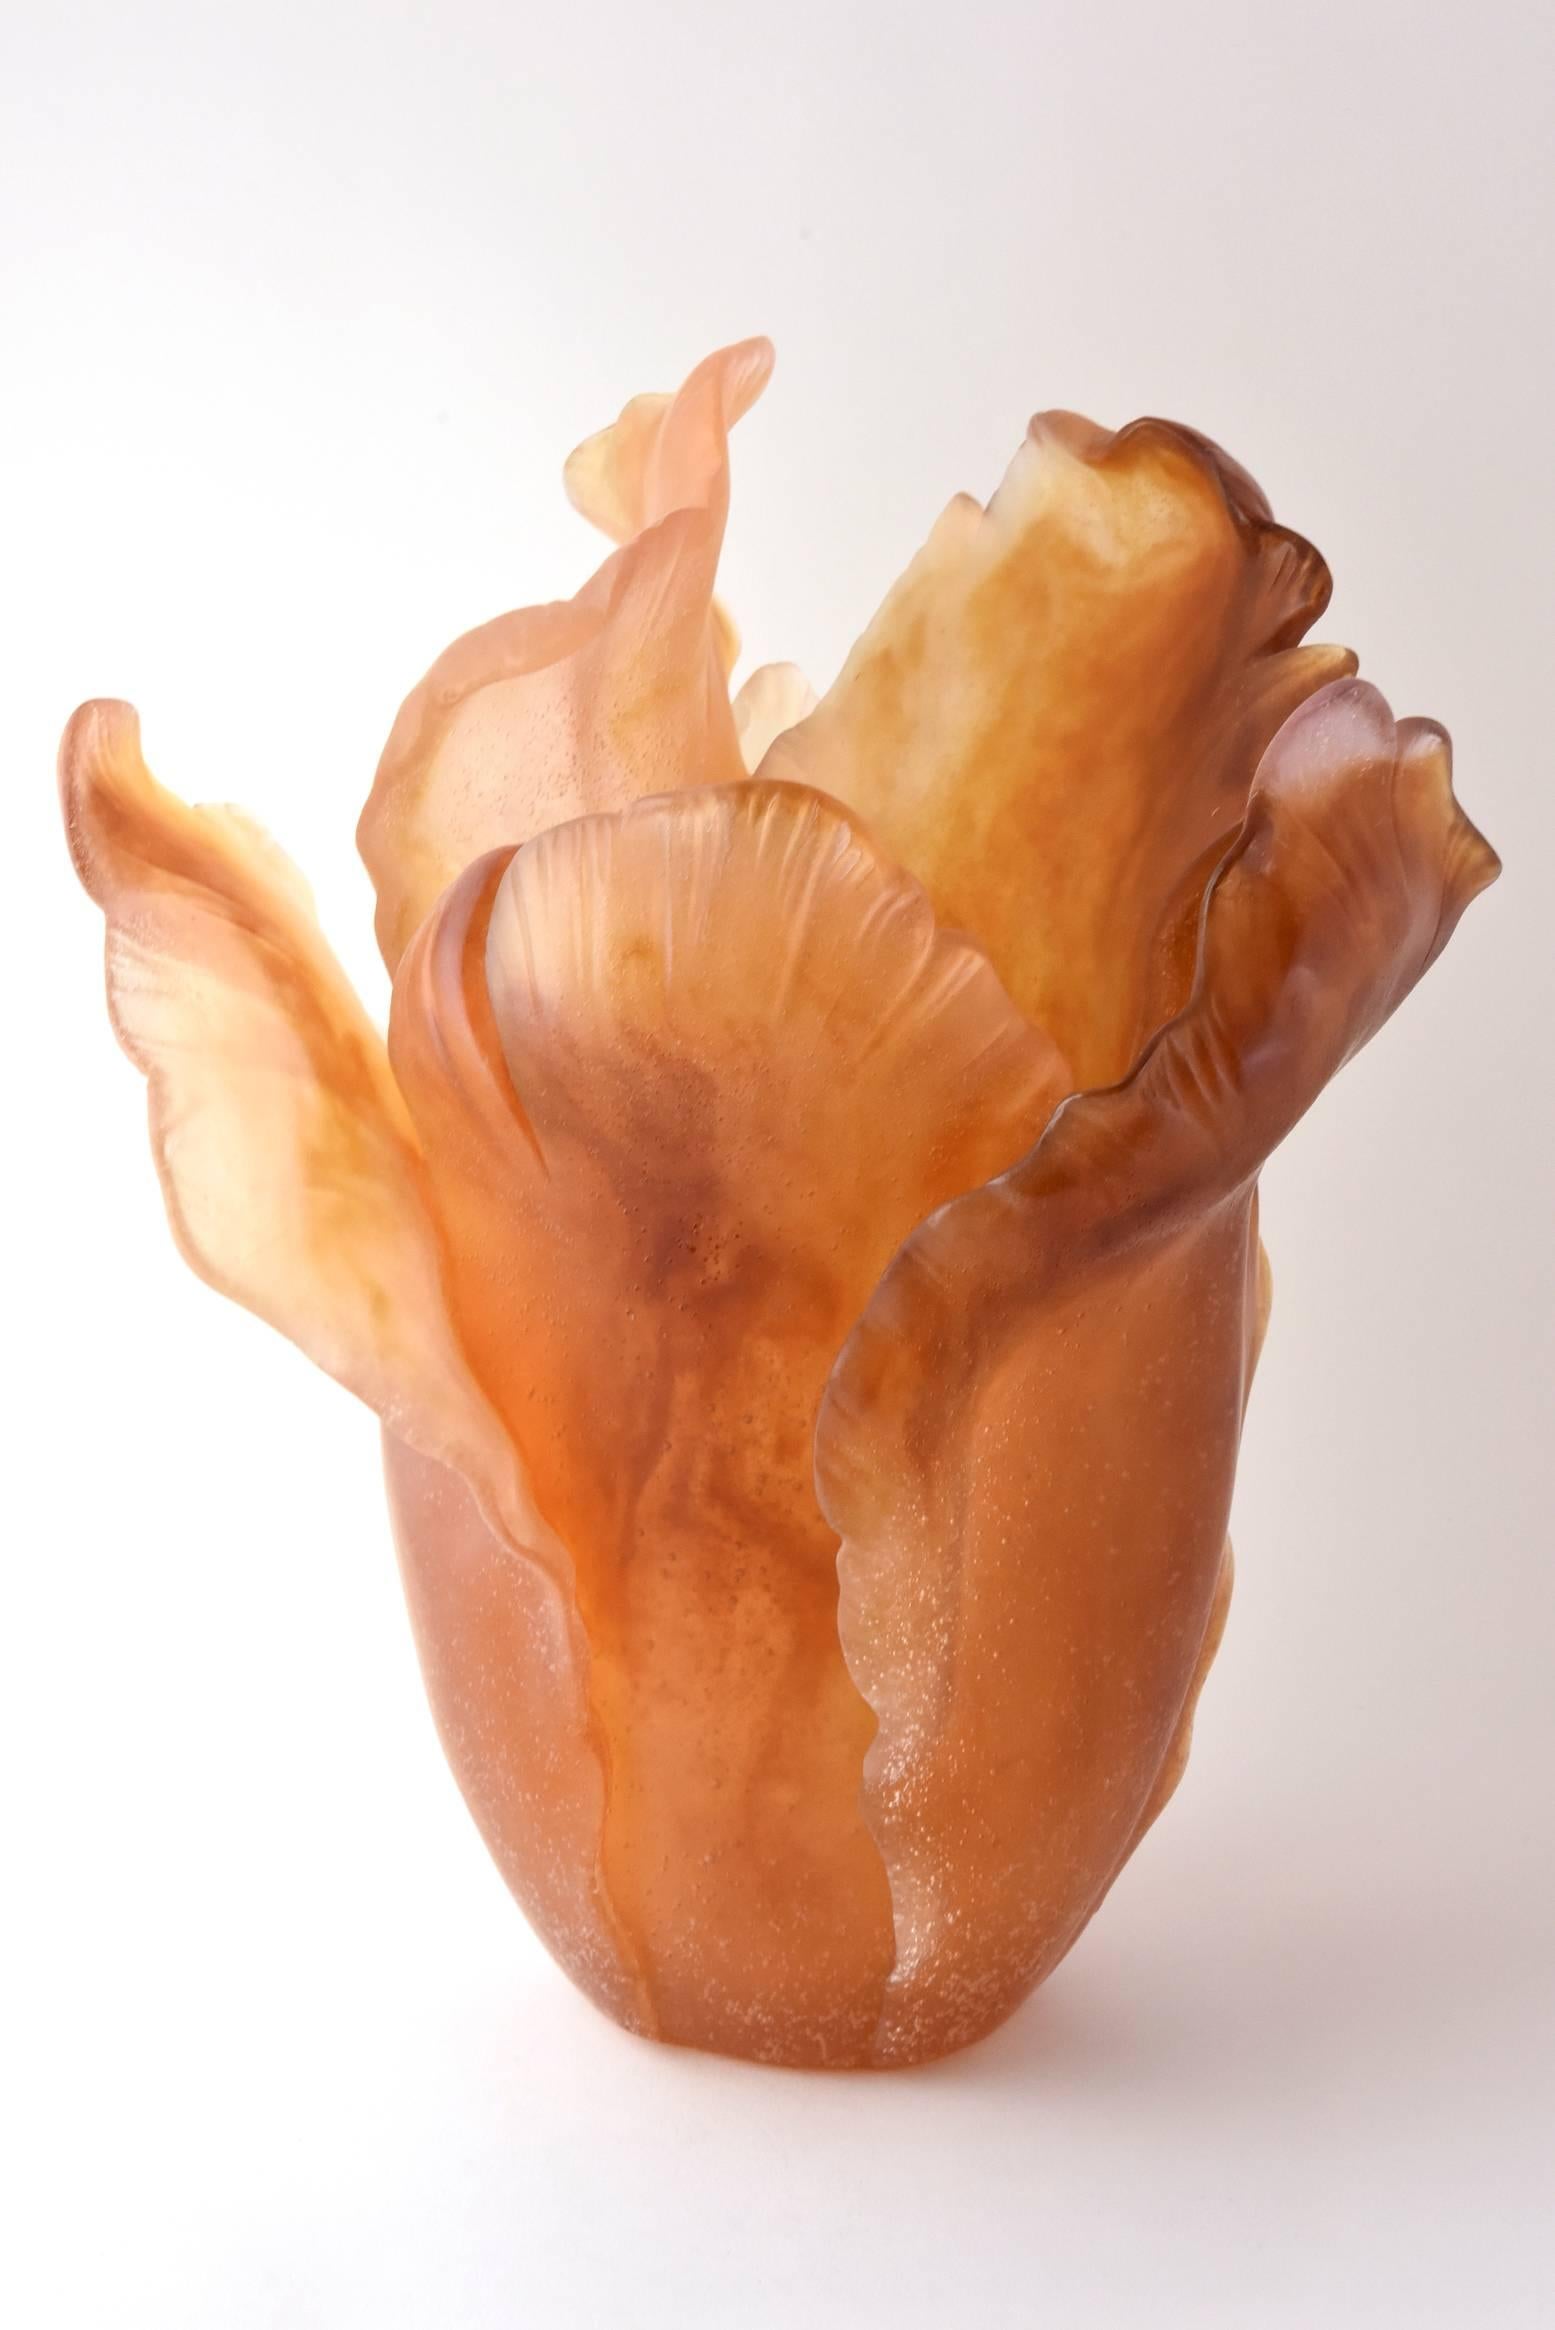 This impressive Daum Amber Tulip Vase was purchased at Neiman Marcus. It was handcrafted in France. 

They are sold out at Neimans, but the current retail price is $4,450..

About Daum:
In 1878, Jean Daum set up a workshop in the Lorrain region of